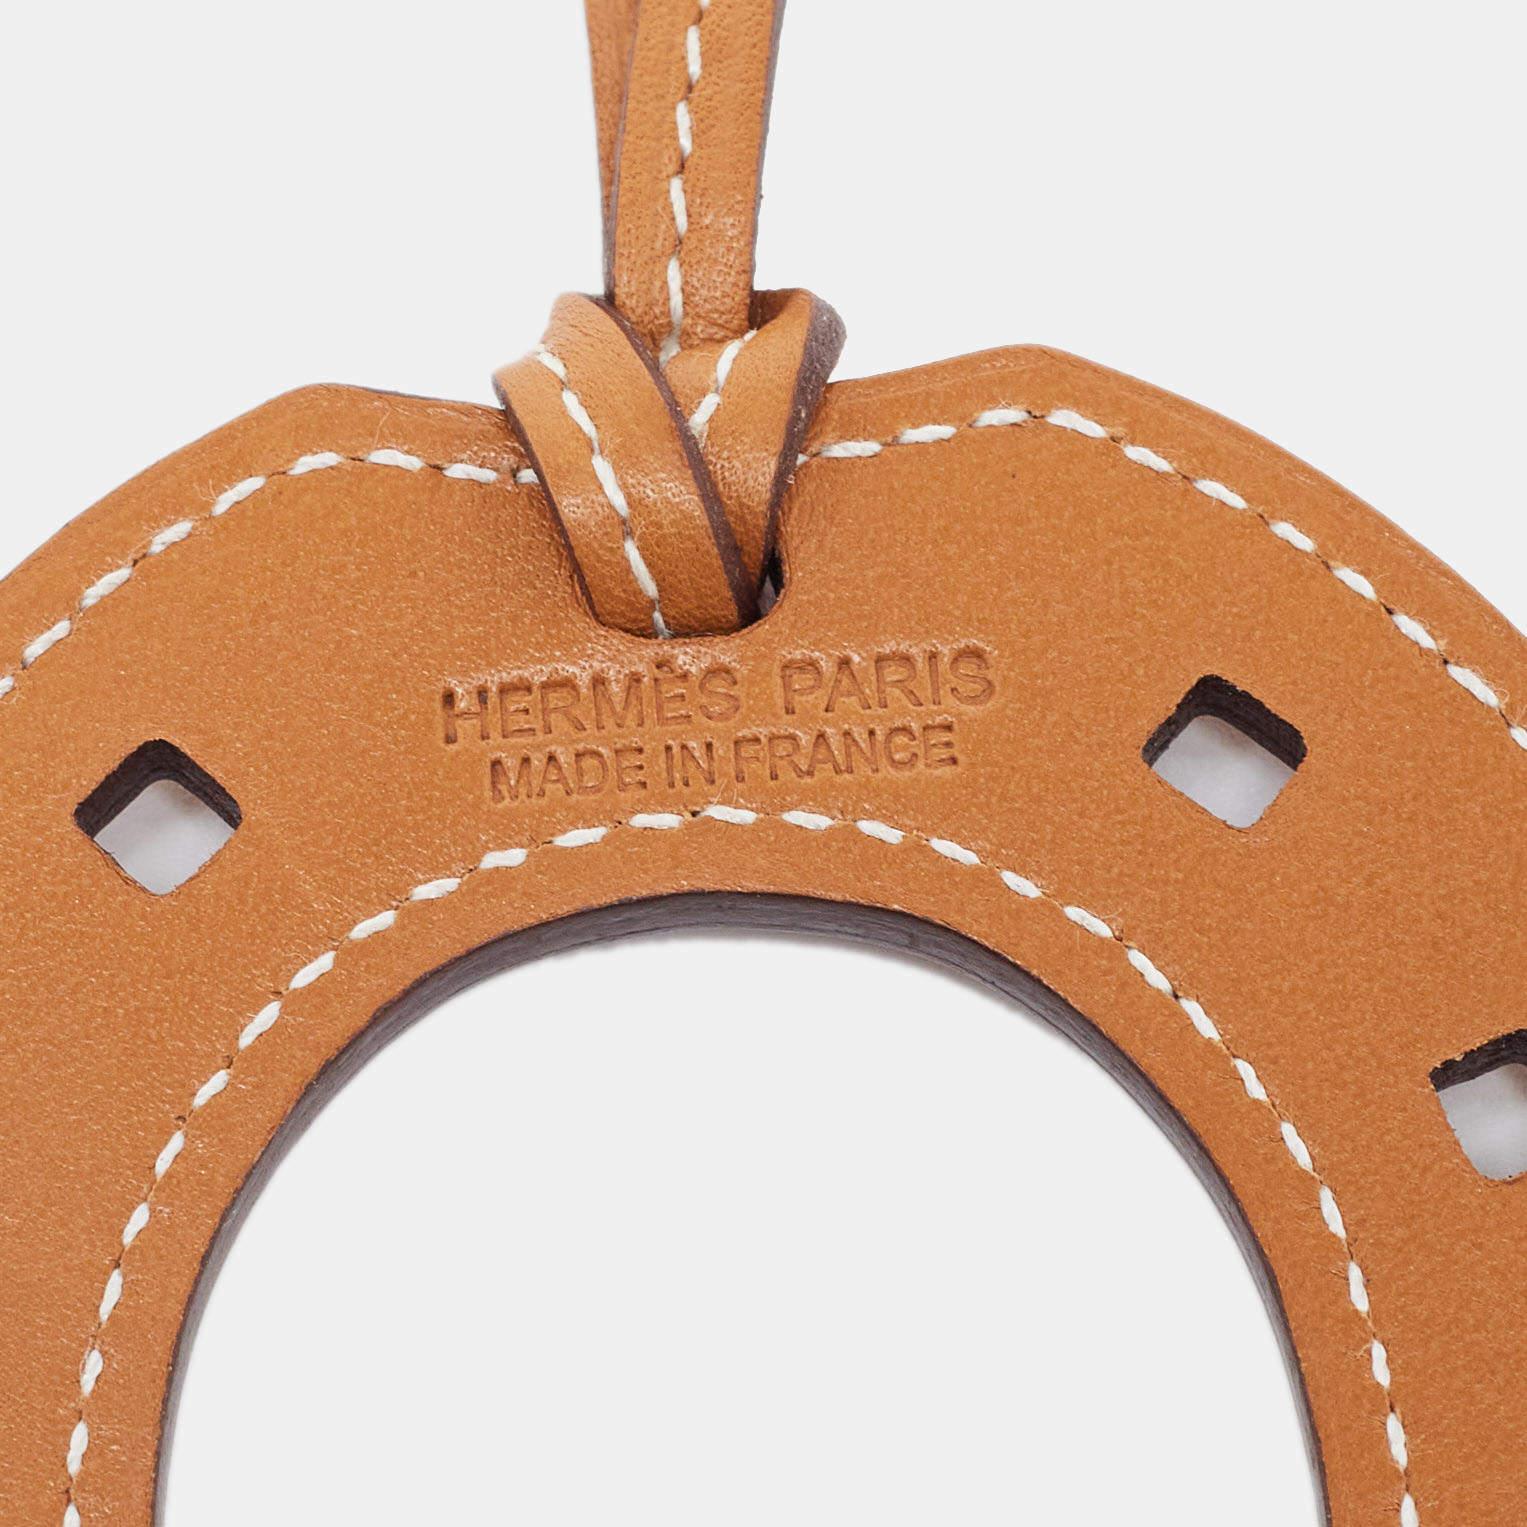 Paying homage to its equestrian heritage, this 'Paddock Fer a Cheval' bag charm from Hermès is a classy accessory to own. It is crafted using leather and hangs from a strap. Needless to say, this Hermès bag charm will add a signature touch to all